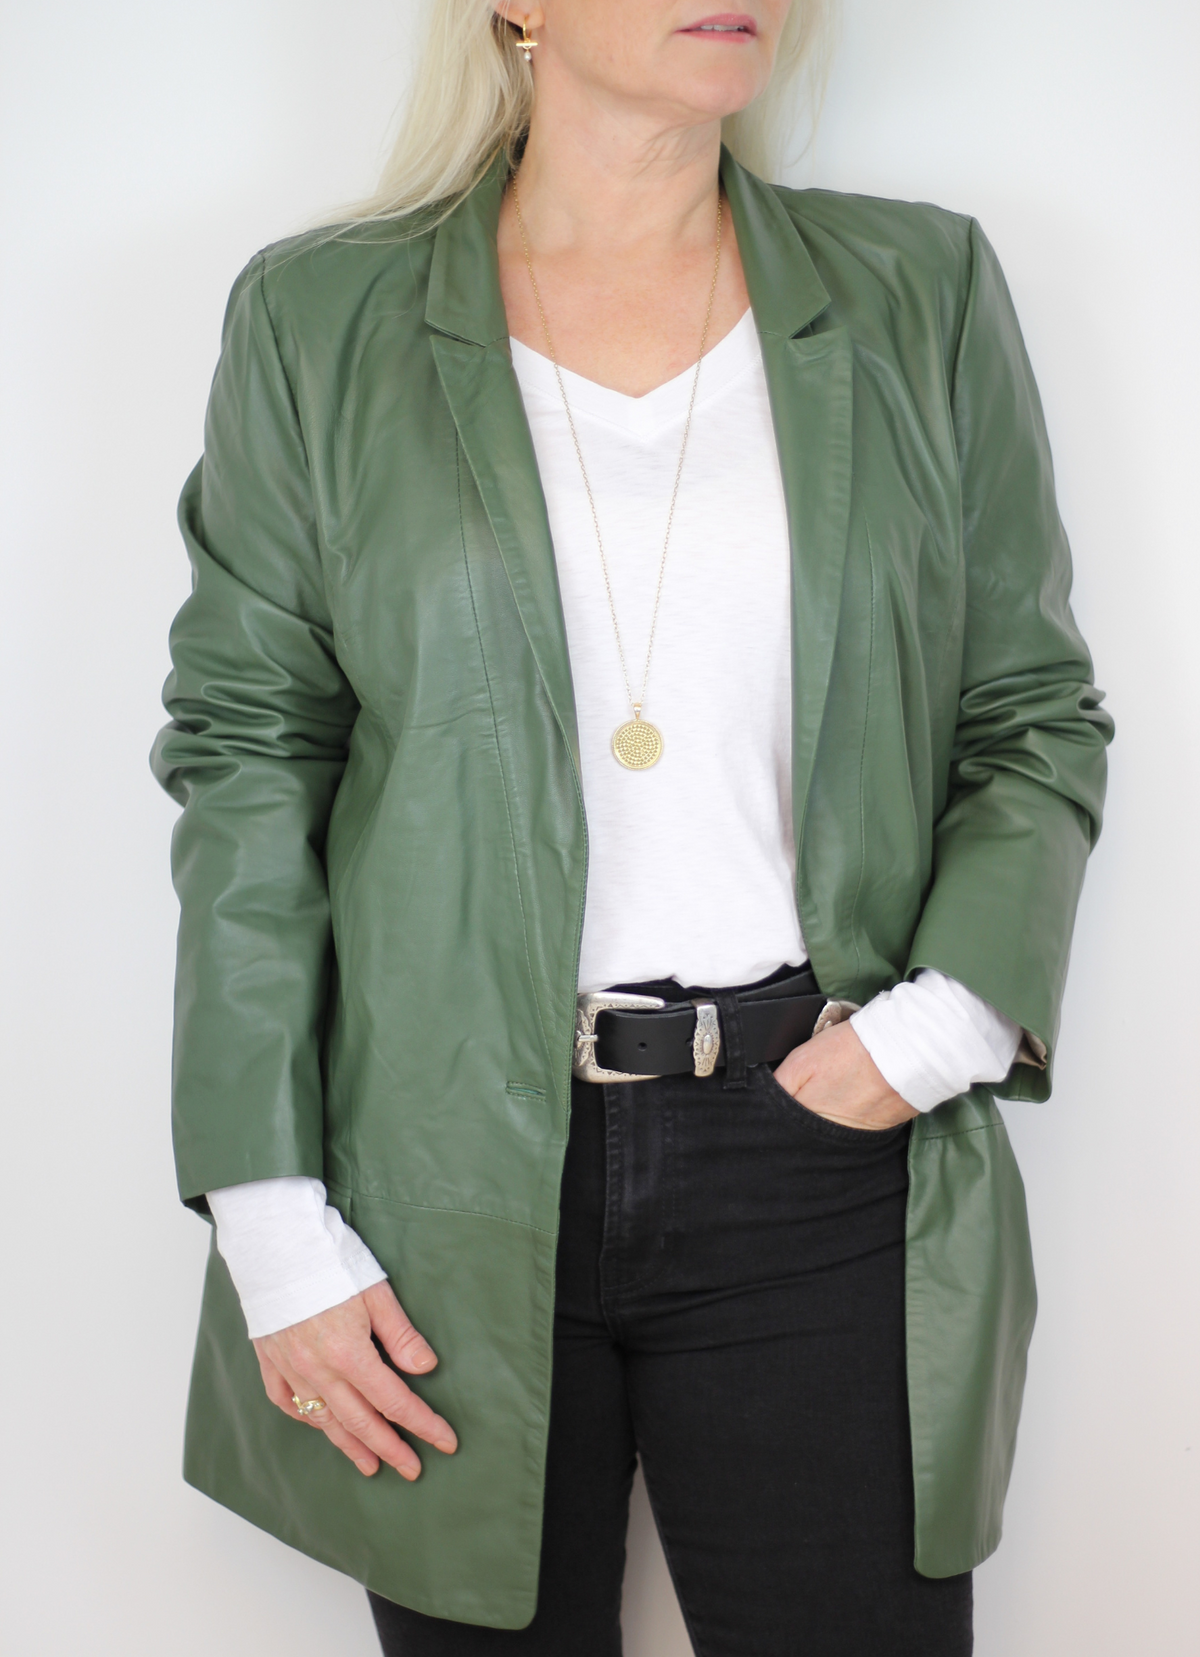 Long line leather blazer in a muted forest green